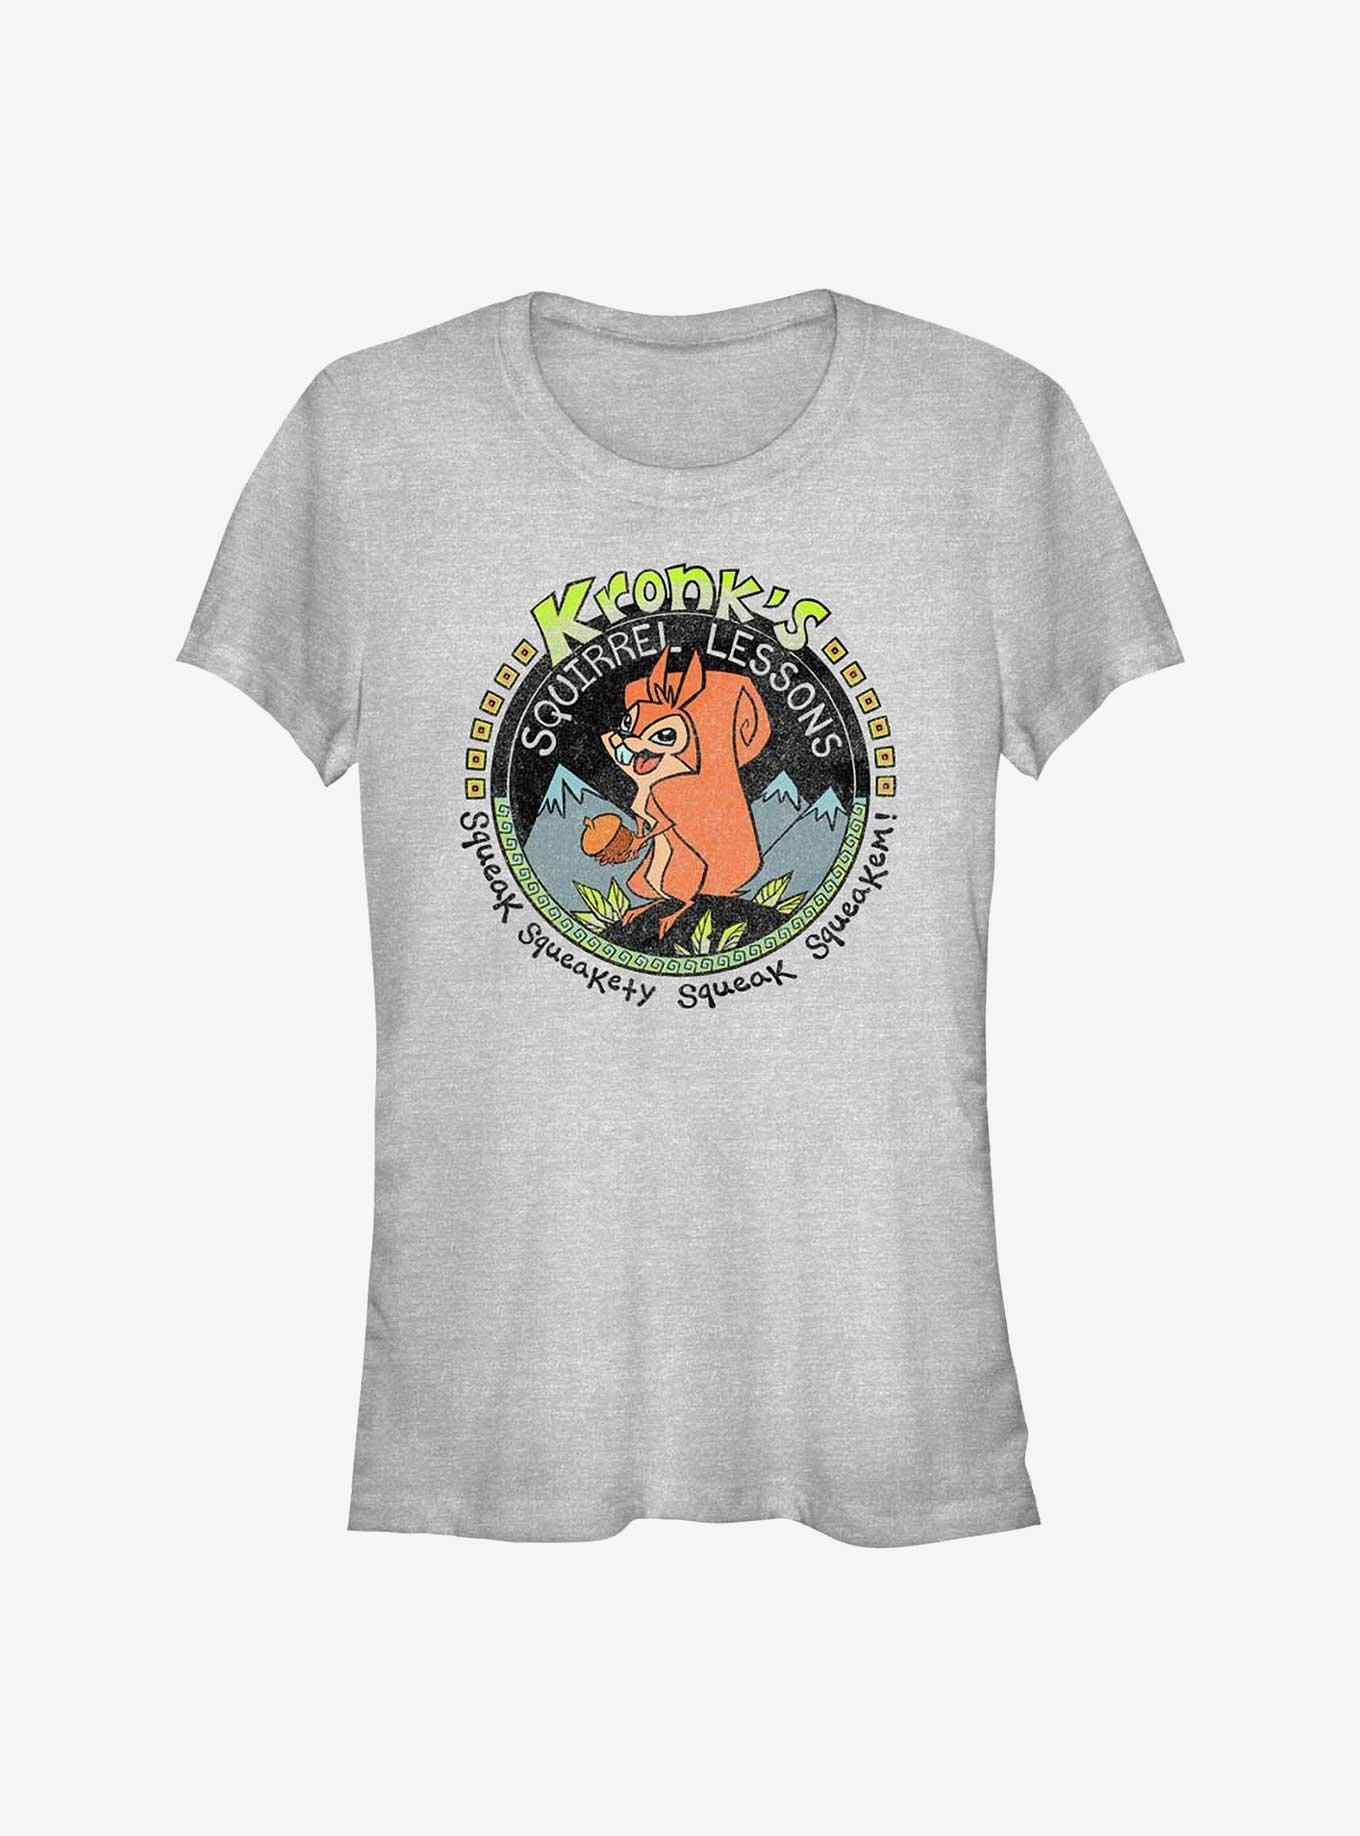 Disney The Emperor's New Groove Kronk's Squirrel Lessons Girls T-Shirt, ATH HTR, hi-res